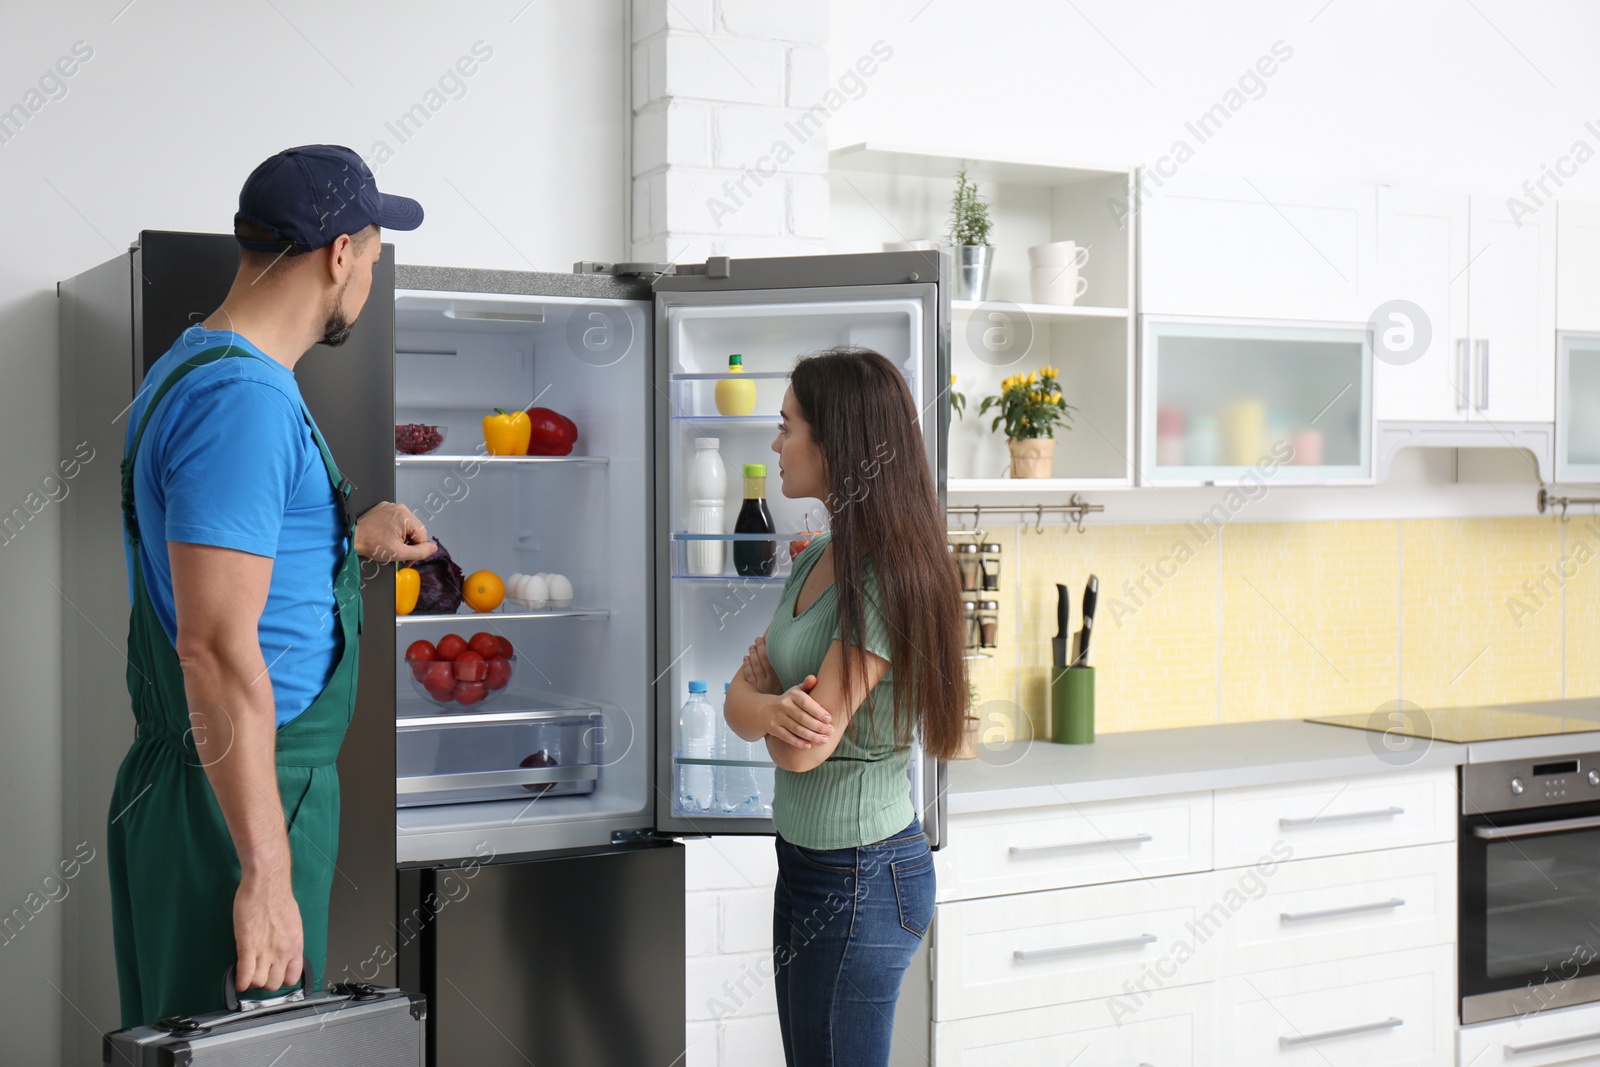 Photo of Male technician talking with client near refrigerator in kitchen